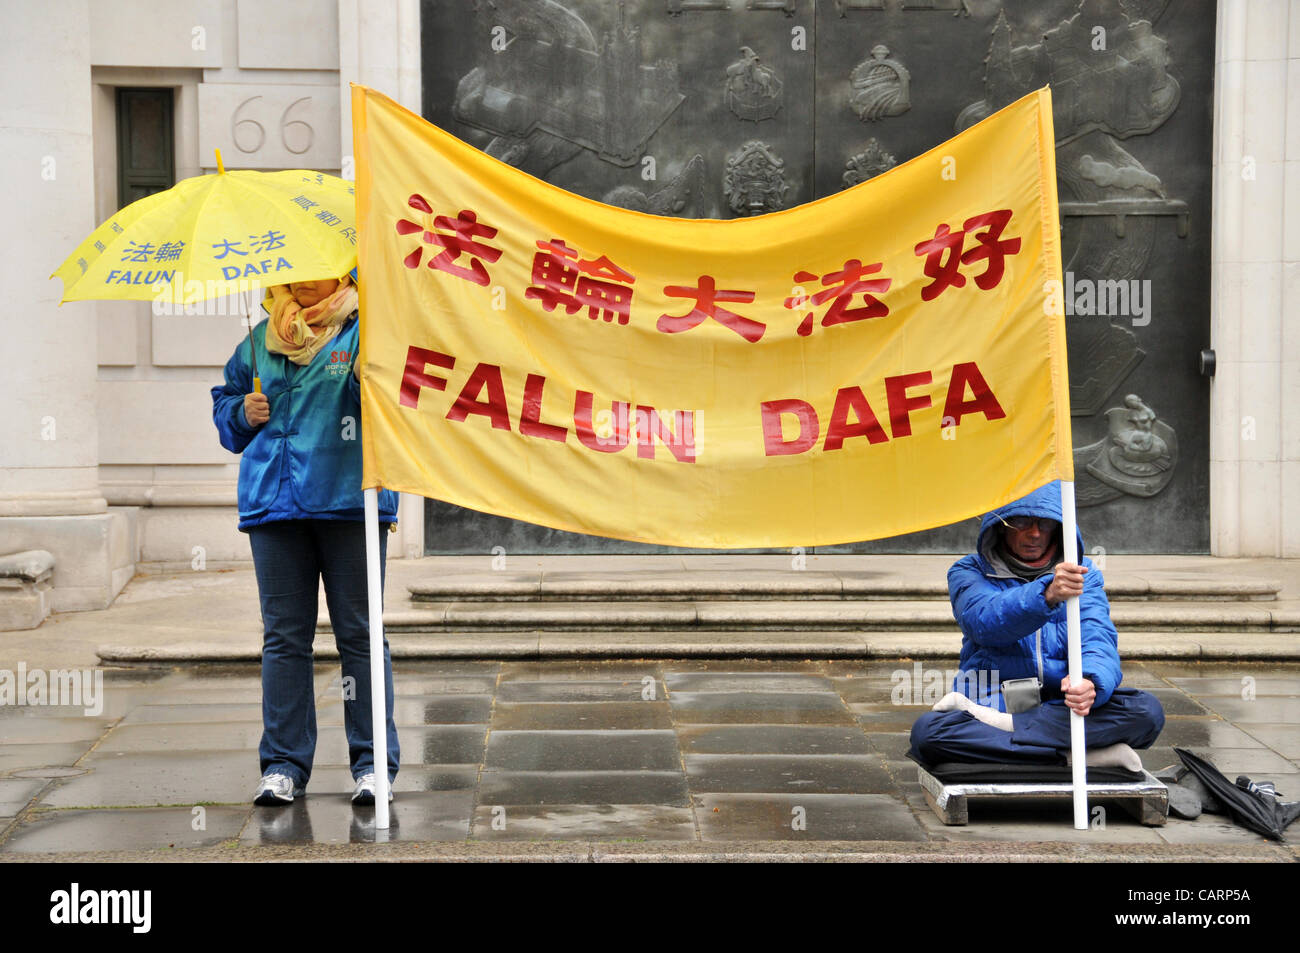 April 15th, 2012. Falun Dafa protesters hold a banner outside the Chinese Embassy in London. A spiritual discipline in China from 1992, the practice is now banned in China, members claim human rights abuse by the Chinese government. Stock Photo